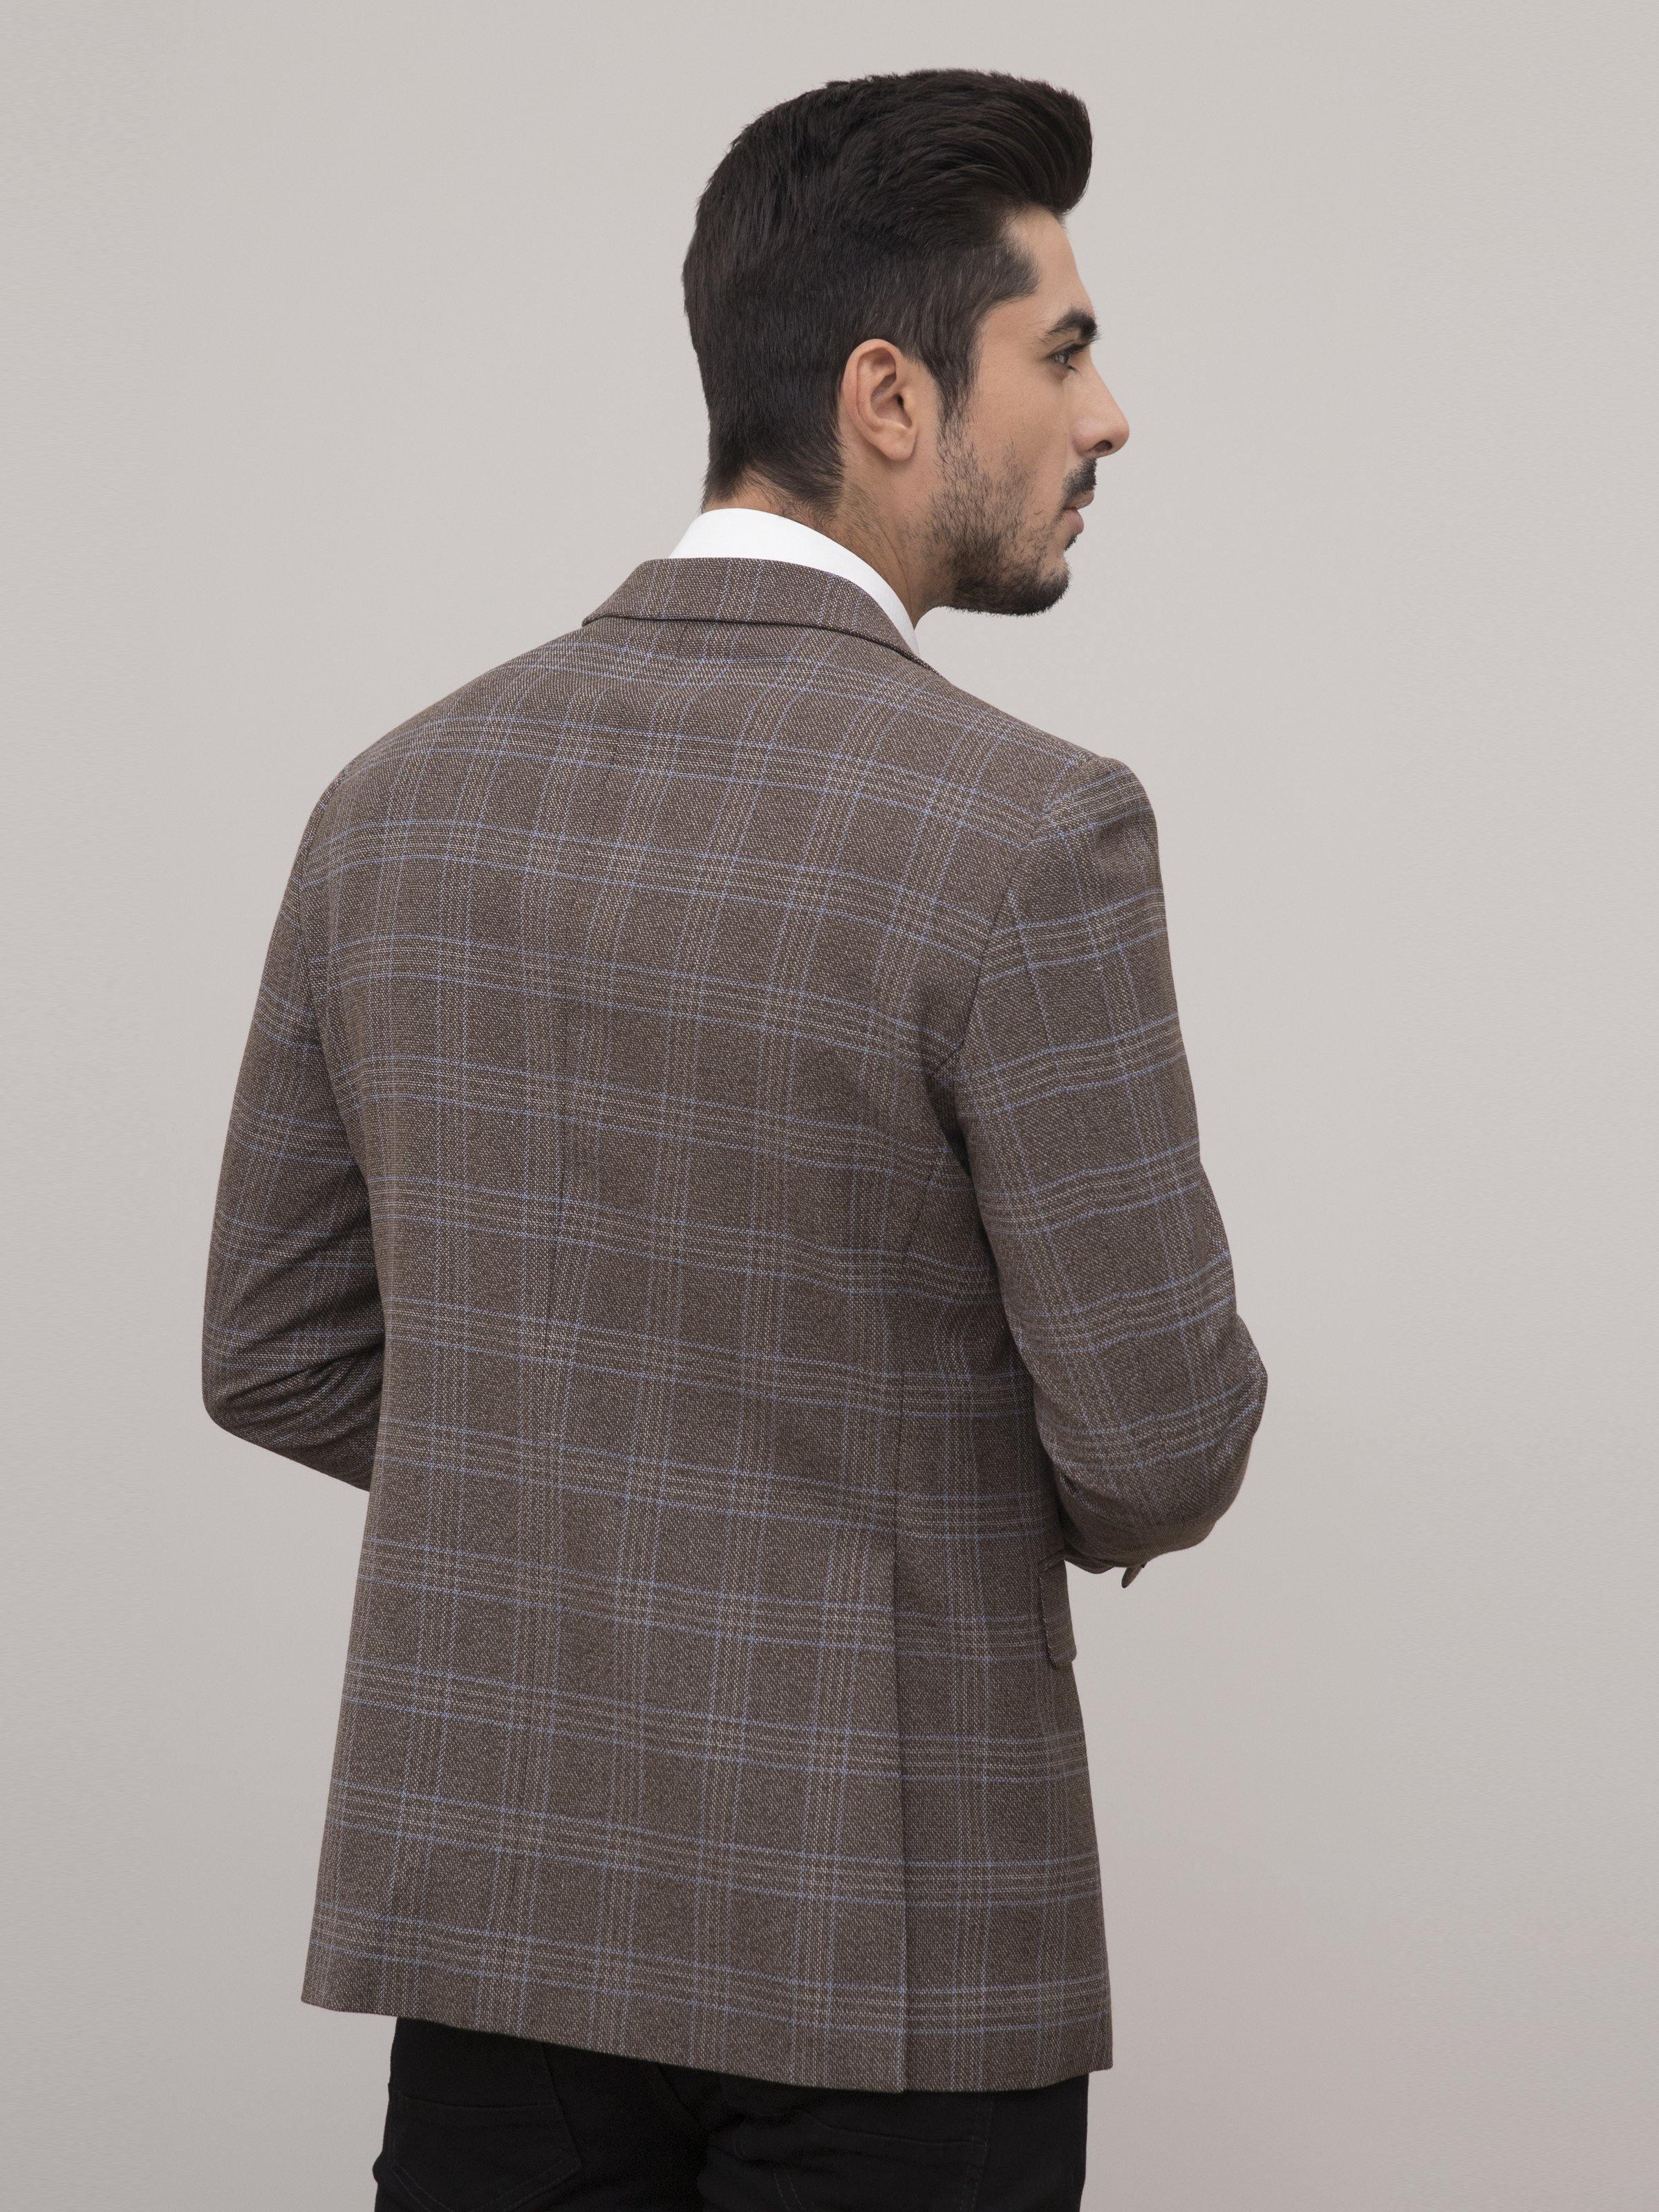 CASUAL COAT SLIM FIT LIGHT BROWN at Charcoal Clothing